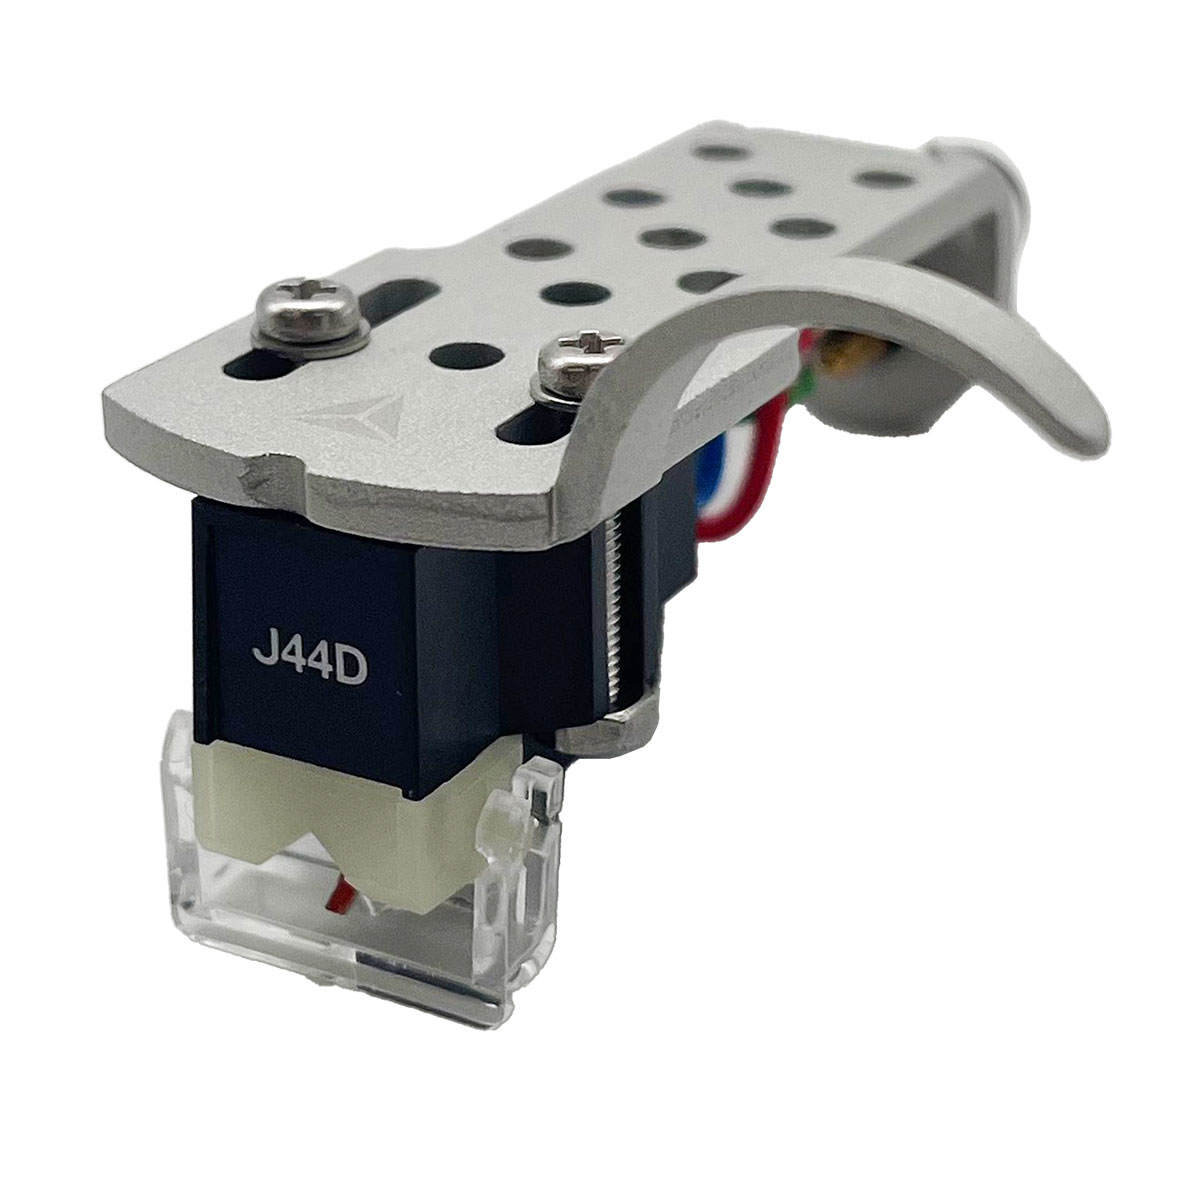 JICO J44D IMPROVED AURORA KIT WITH SILVER HEADSHELL, SCREWS AND WIRES